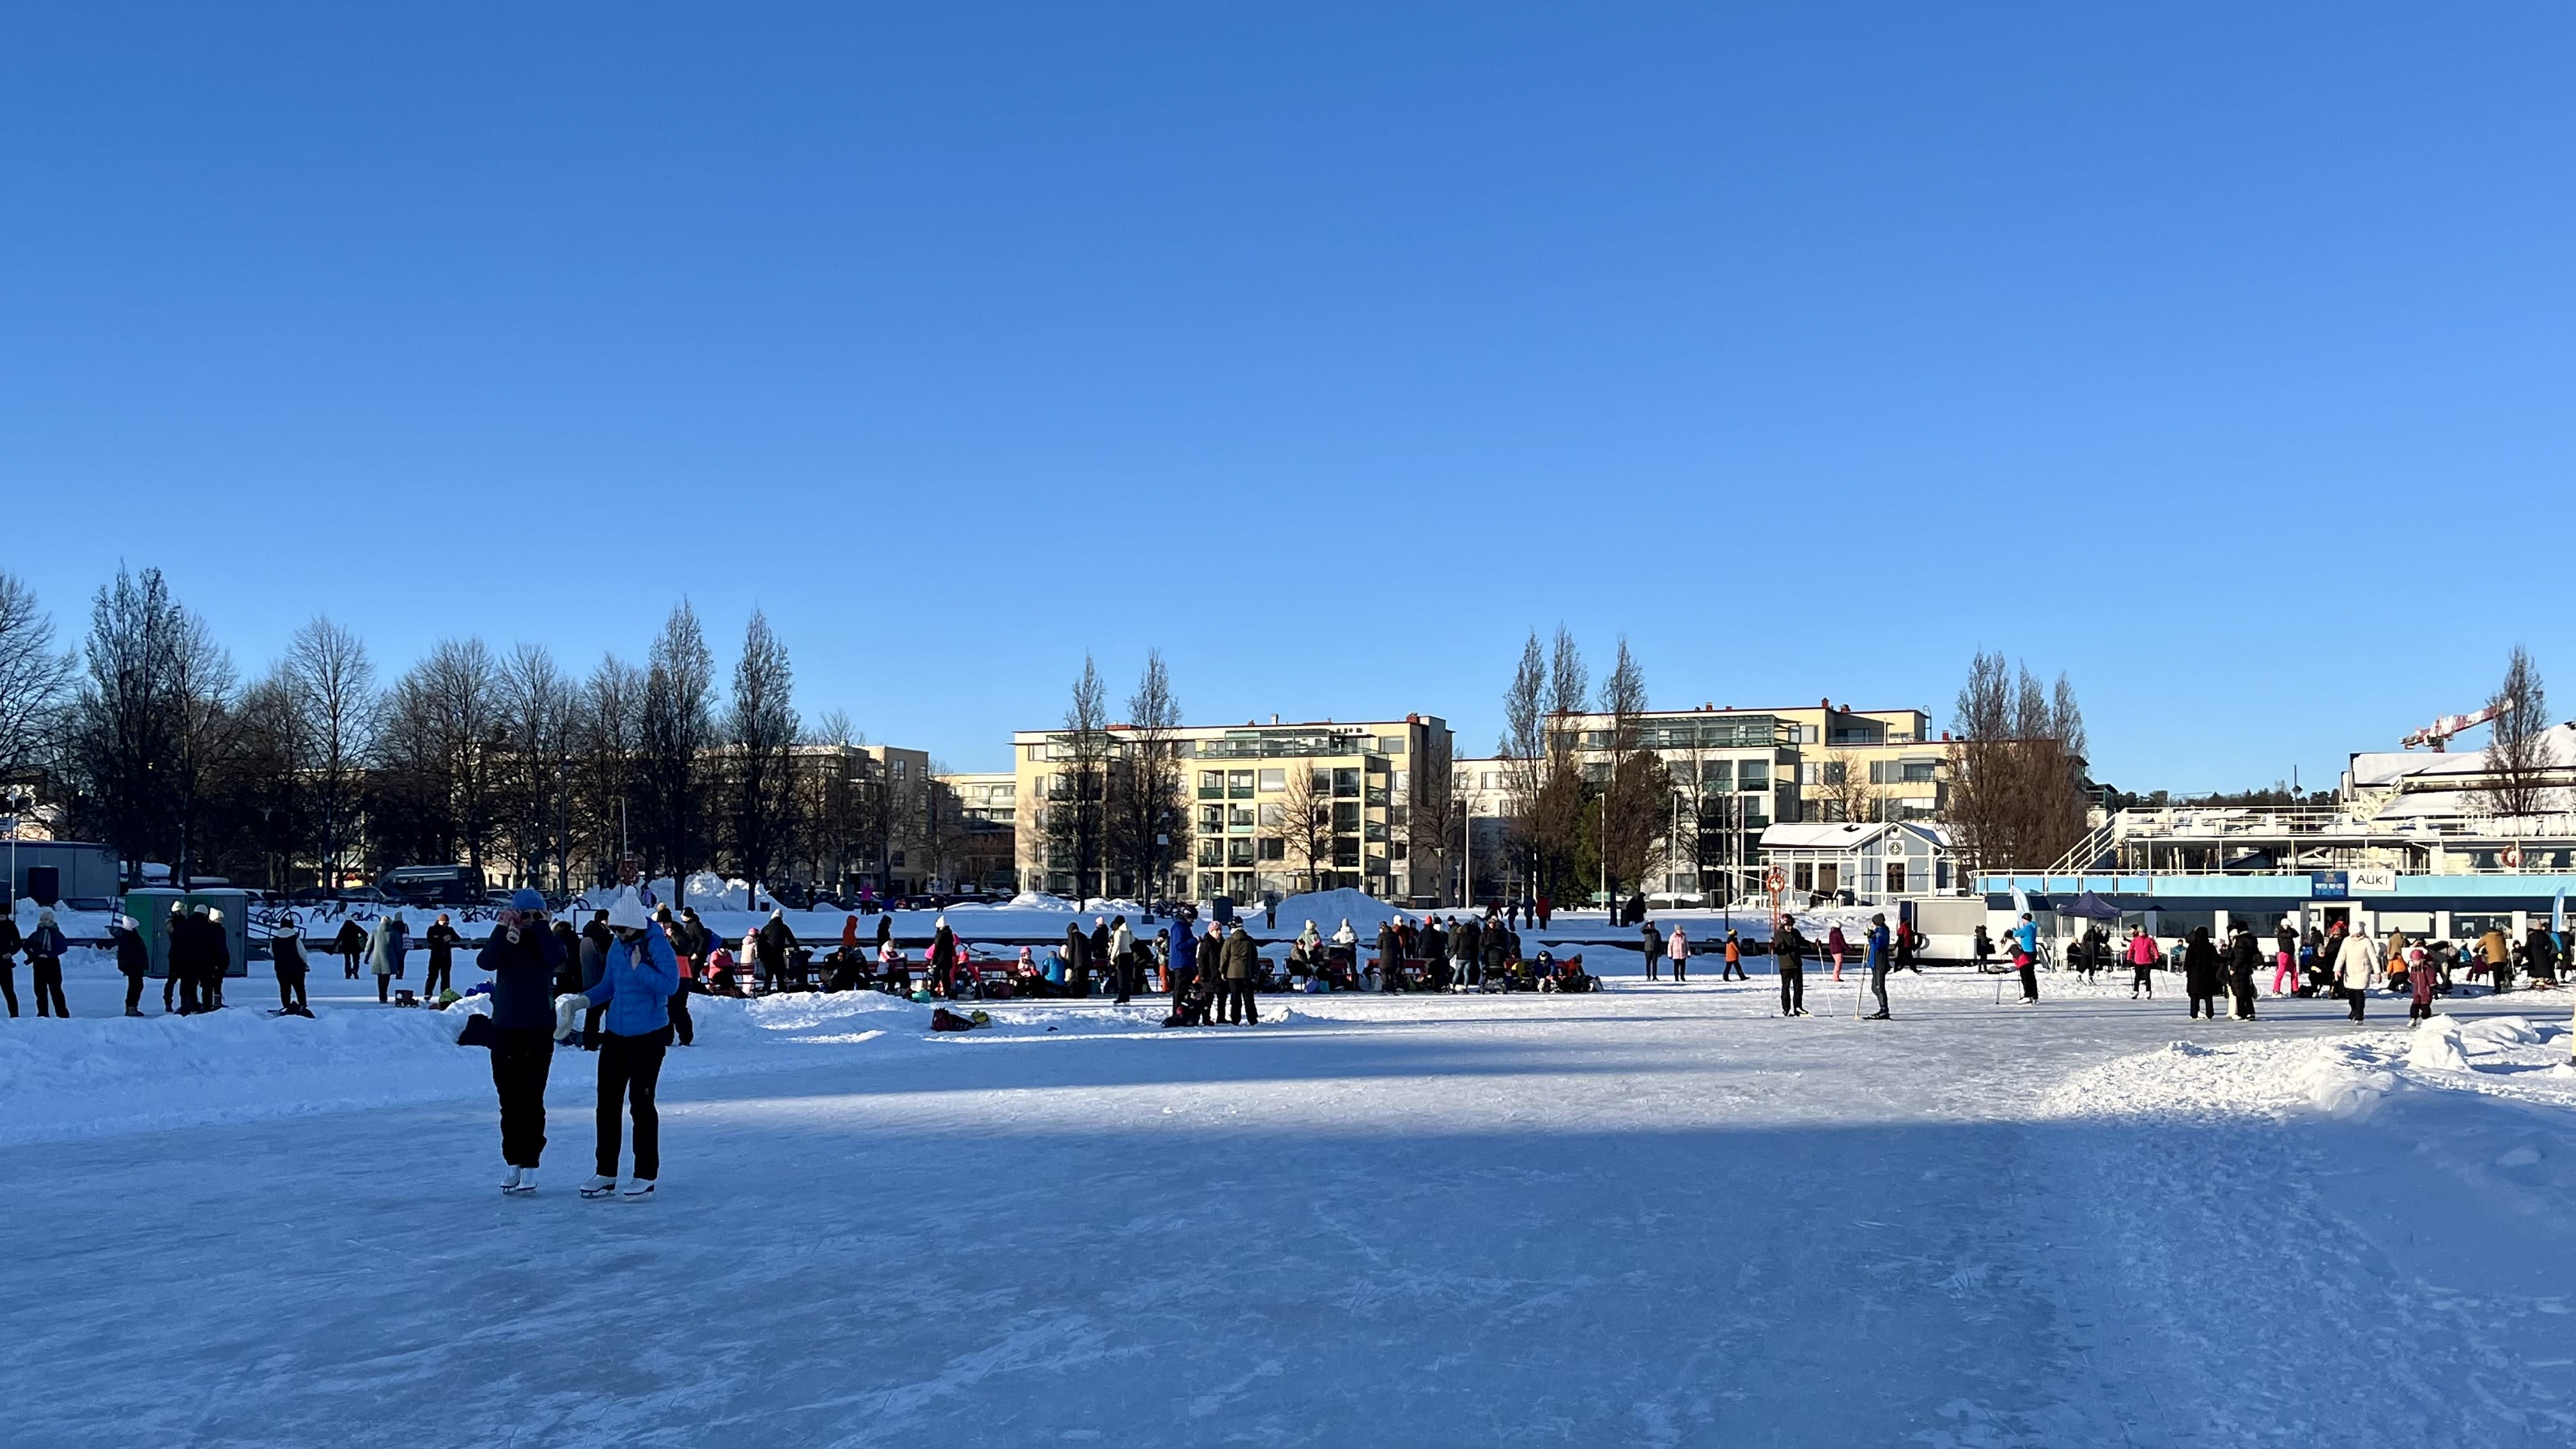 Finland has April temperatures in mid-February